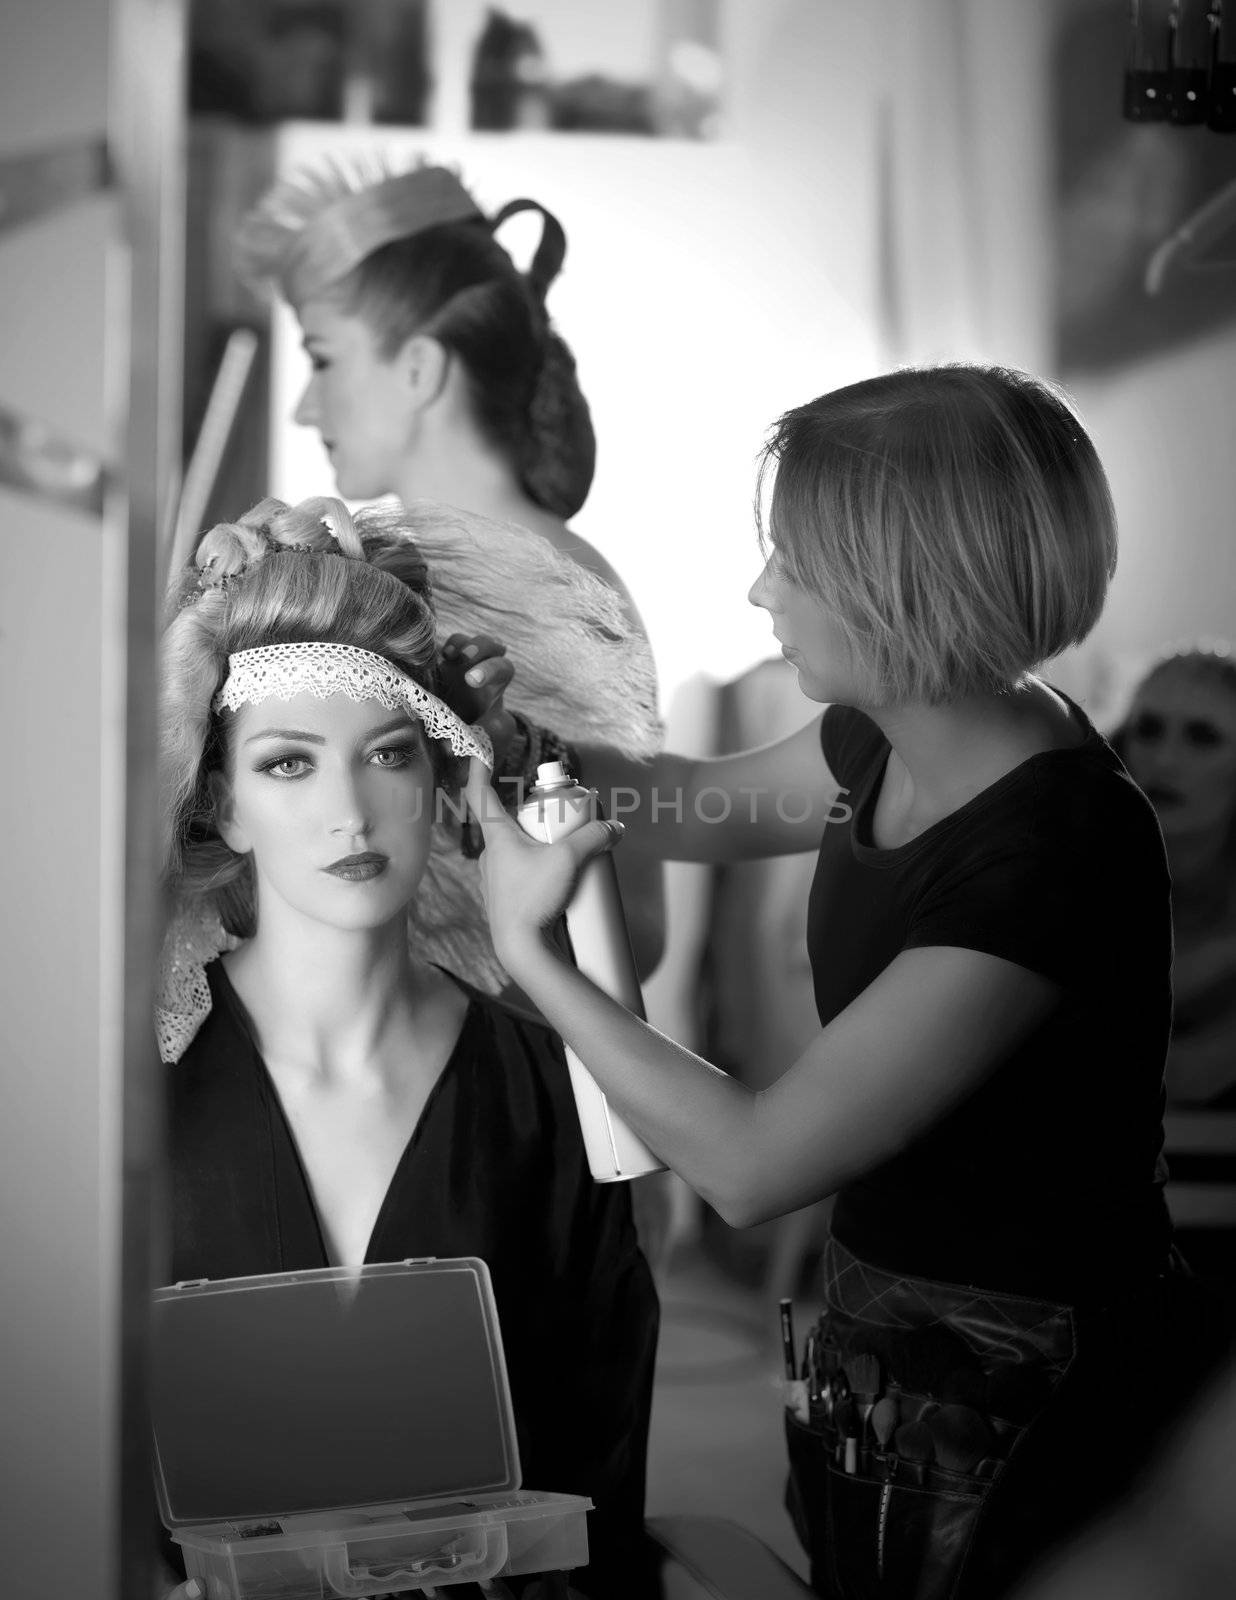 backstage hairdressing and makeup fashion with make-up artist